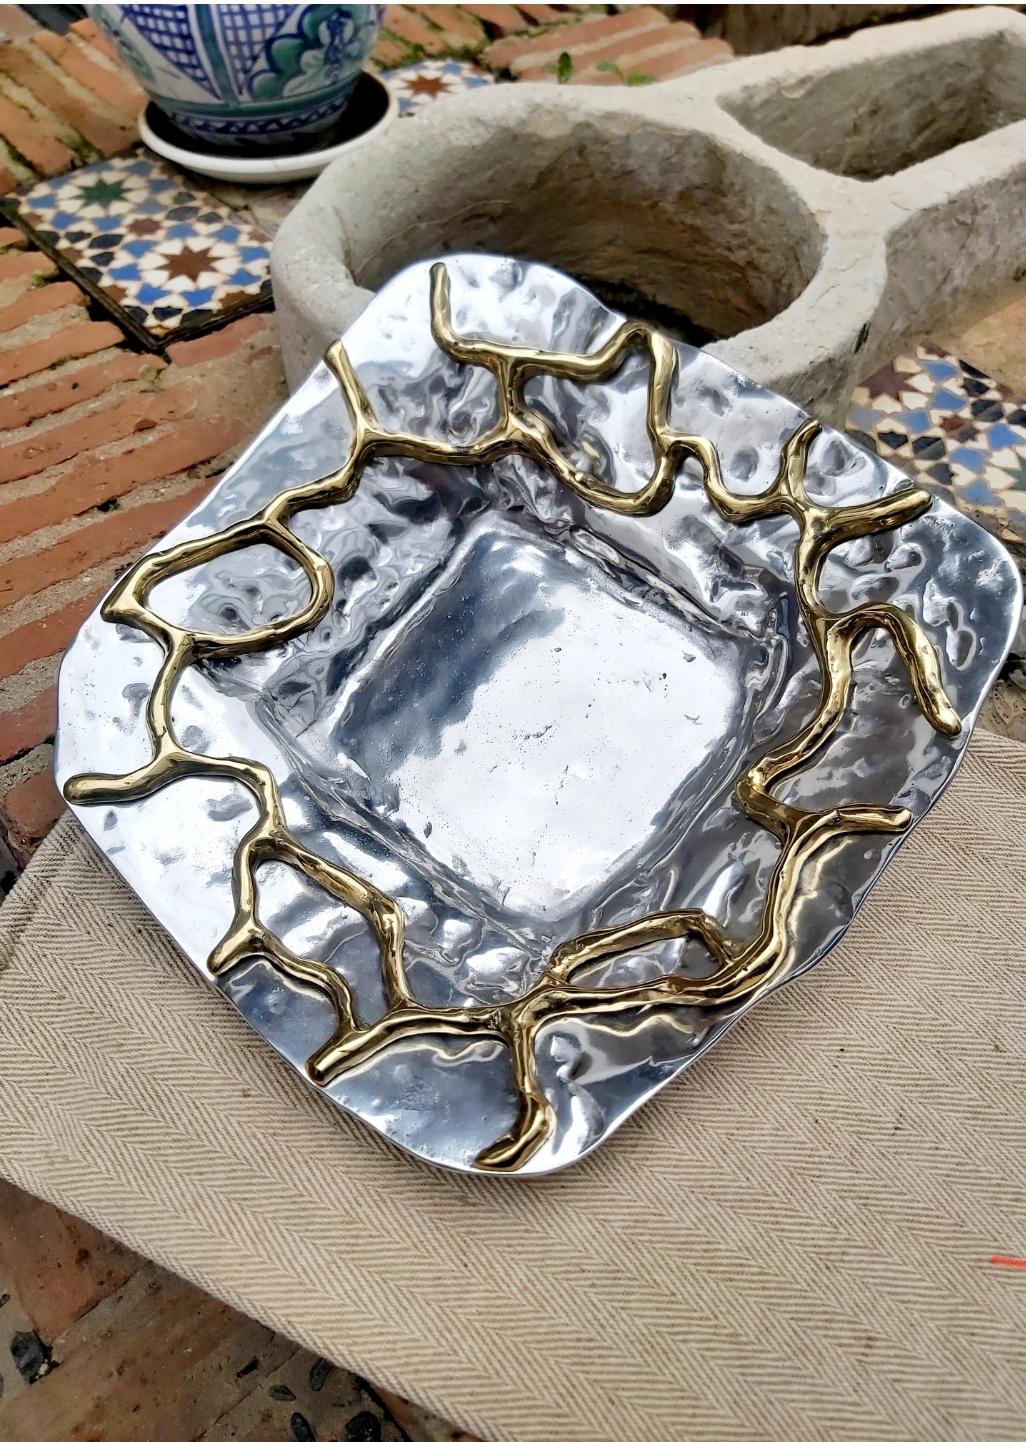 The abstract bowl was created by David Marshall, from sand cast aluminium.
 We use recycled materials all our pieces are handmade, mounted and finished in our foundry and workshop in Spain.
It is certified authentic by the Artist David